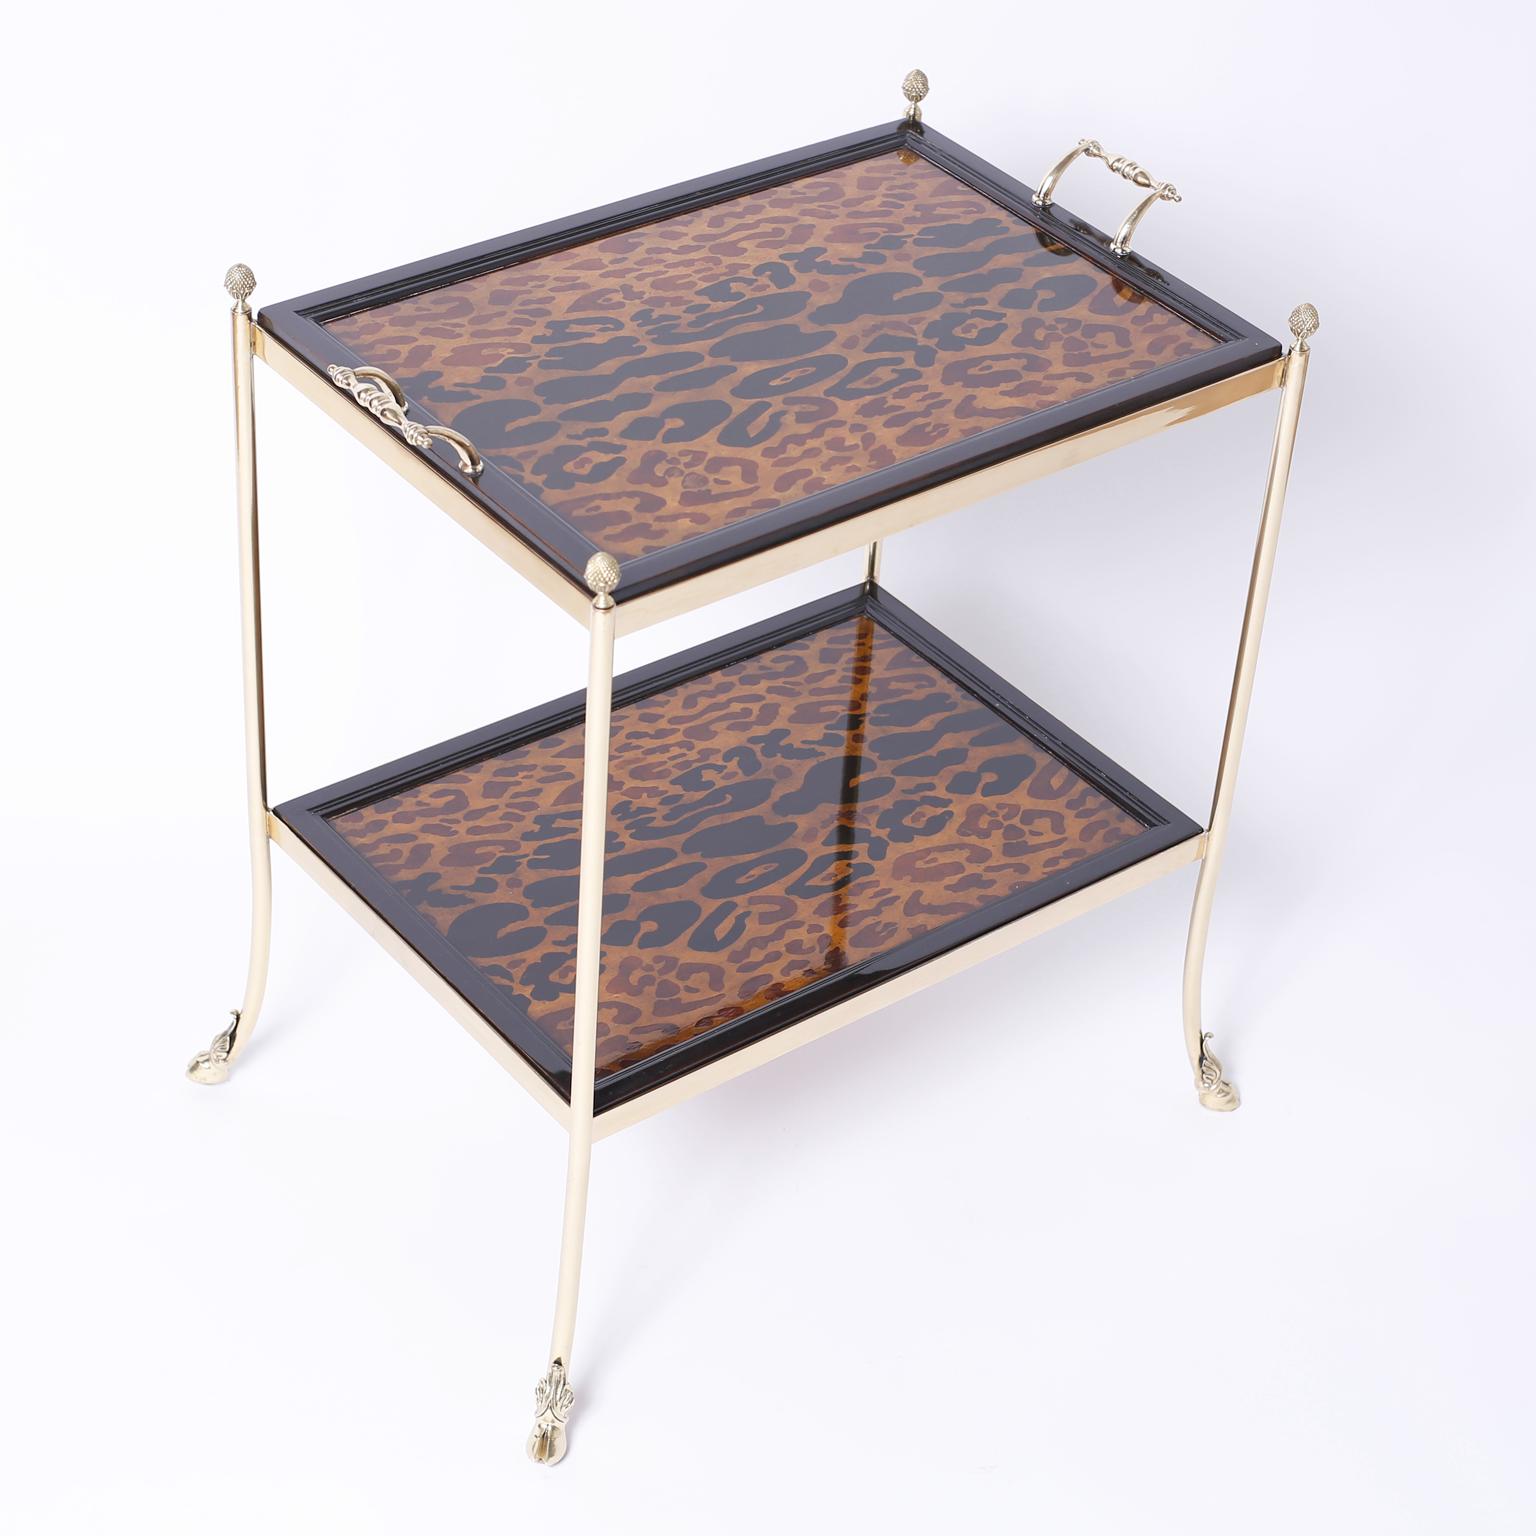 Midcentury two-tiered bar or server with a brass frame having pine apple finials and hoofed feet. The service area has a removable tray that features leopard print under glass on both tiers. Signed Maitland-Smith on the bottom.